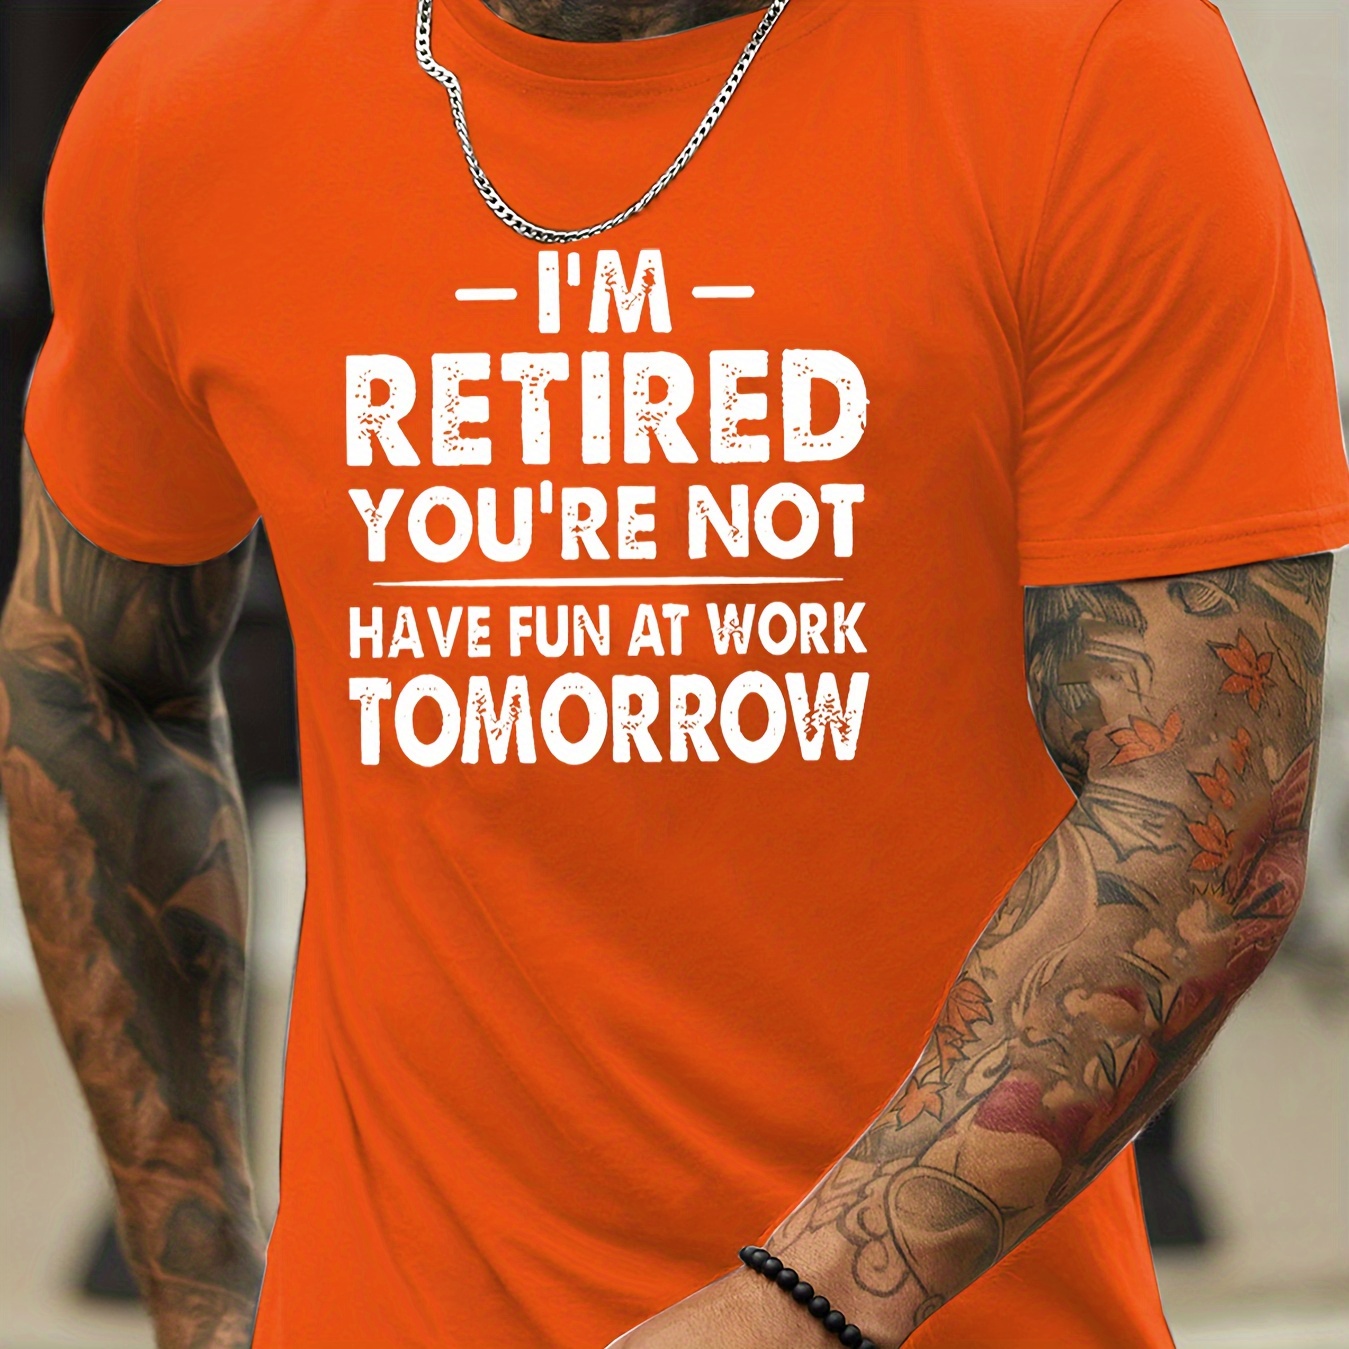 

I'm Retired You're Not Alphabet Print Crew Neck Short Sleeve T-shirt For Men, Casual Summer T-shirt For Daily Wear And Vacation Resorts